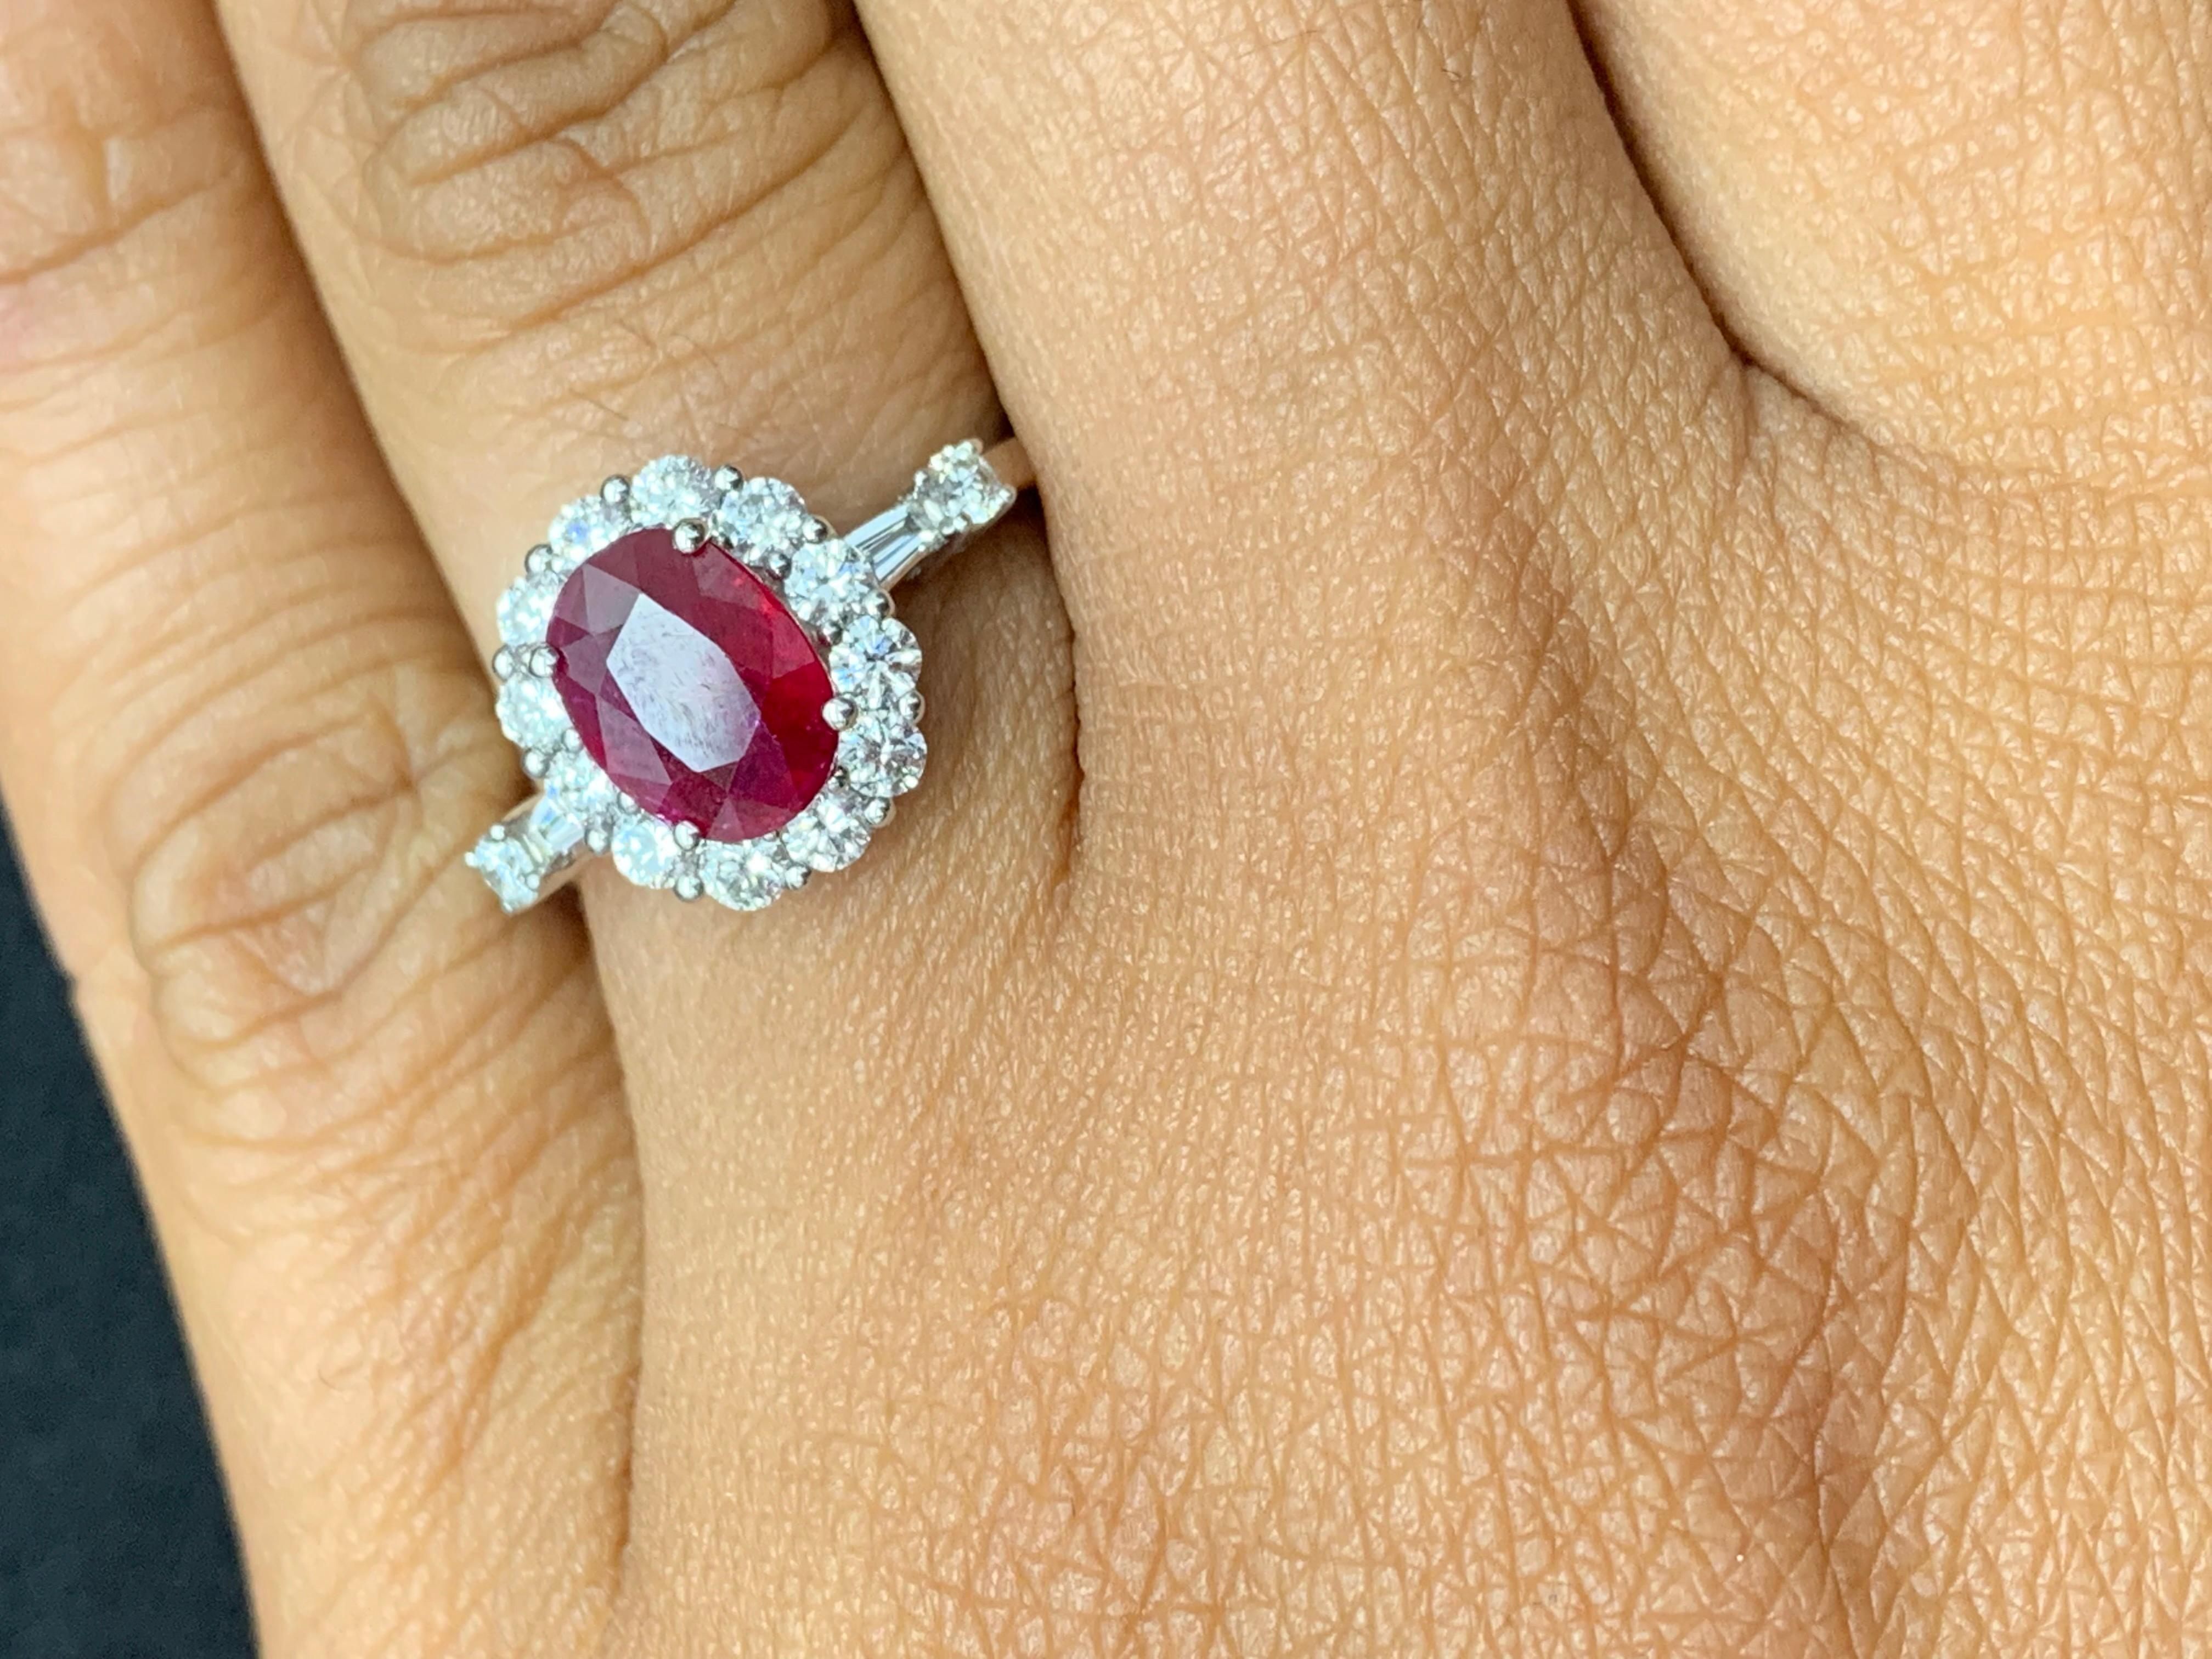 A classic and timeless piece of jewelry showcasing a 1.33 carat Oval cut ruby. Center stone is surrounded by 12 brilliant-cut diamonds followed by 2 baguette diamonds in 18k white gold. Accent diamonds are approximately 0.64 carats total.

Style